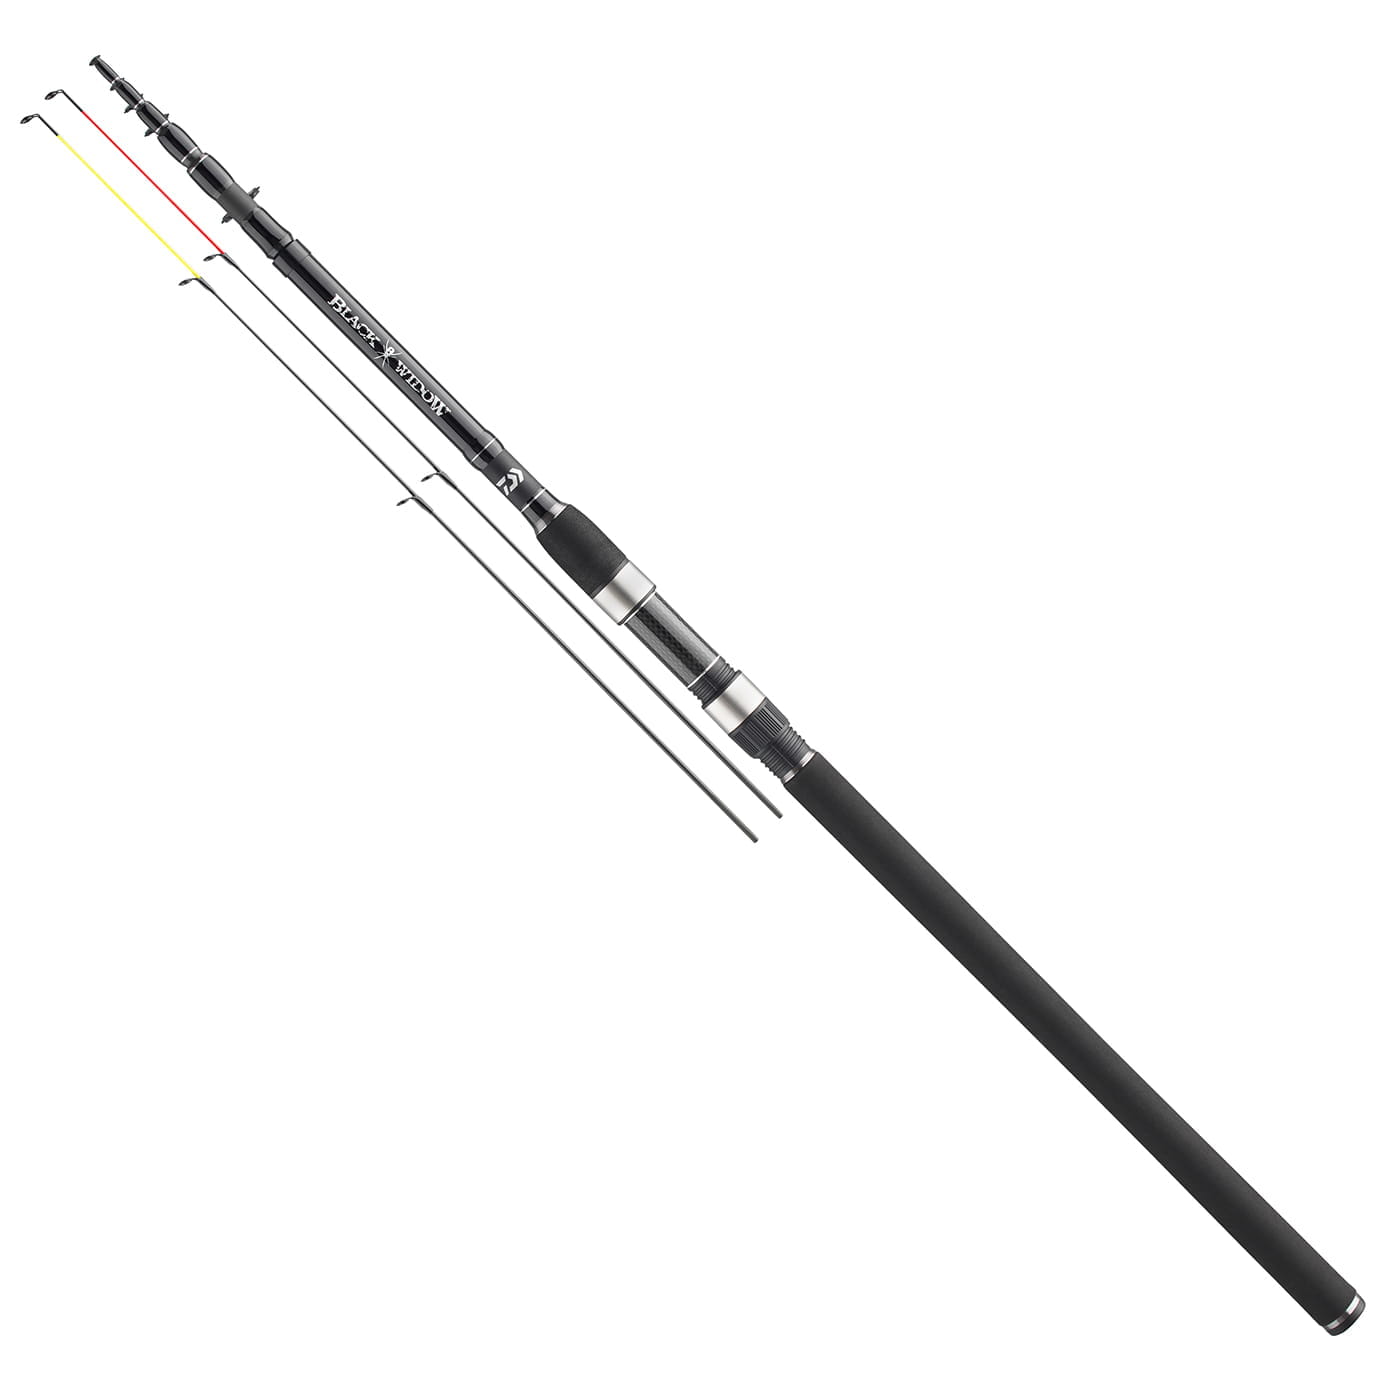 Feeder Rods for your fishing adventures